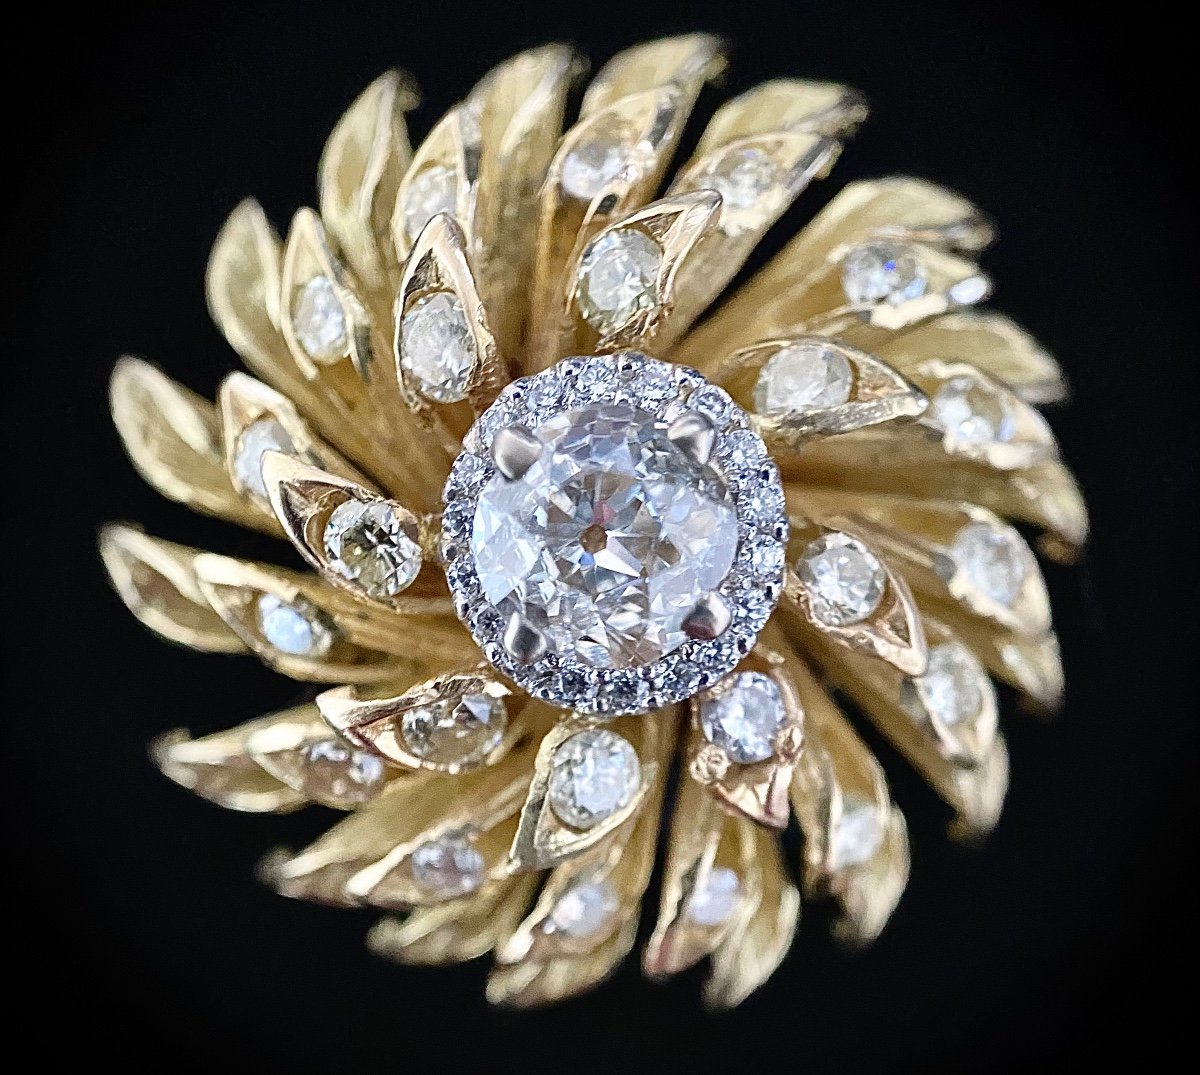 Flower Ring Set With A Central Brilliant Of 0.95 Carats (si-i/j)